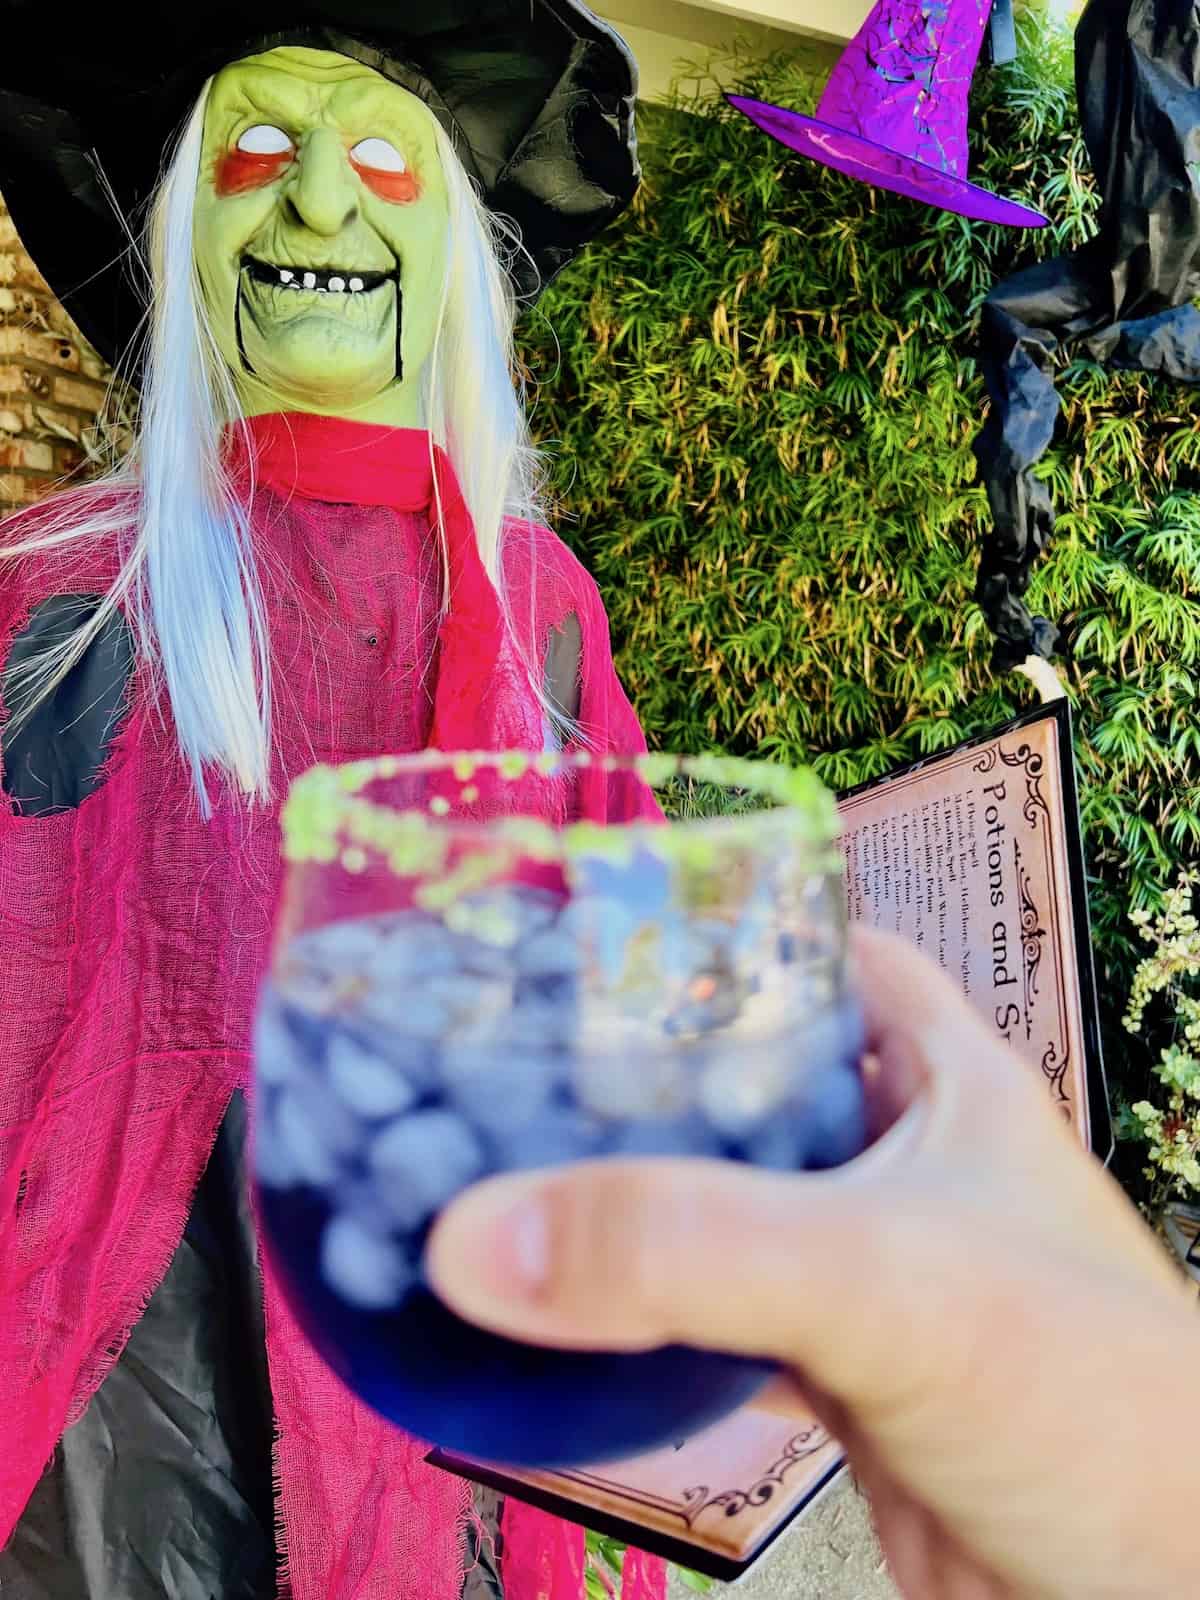 Witches Brew Cocktail in a glass being held in front of a decorative witch.